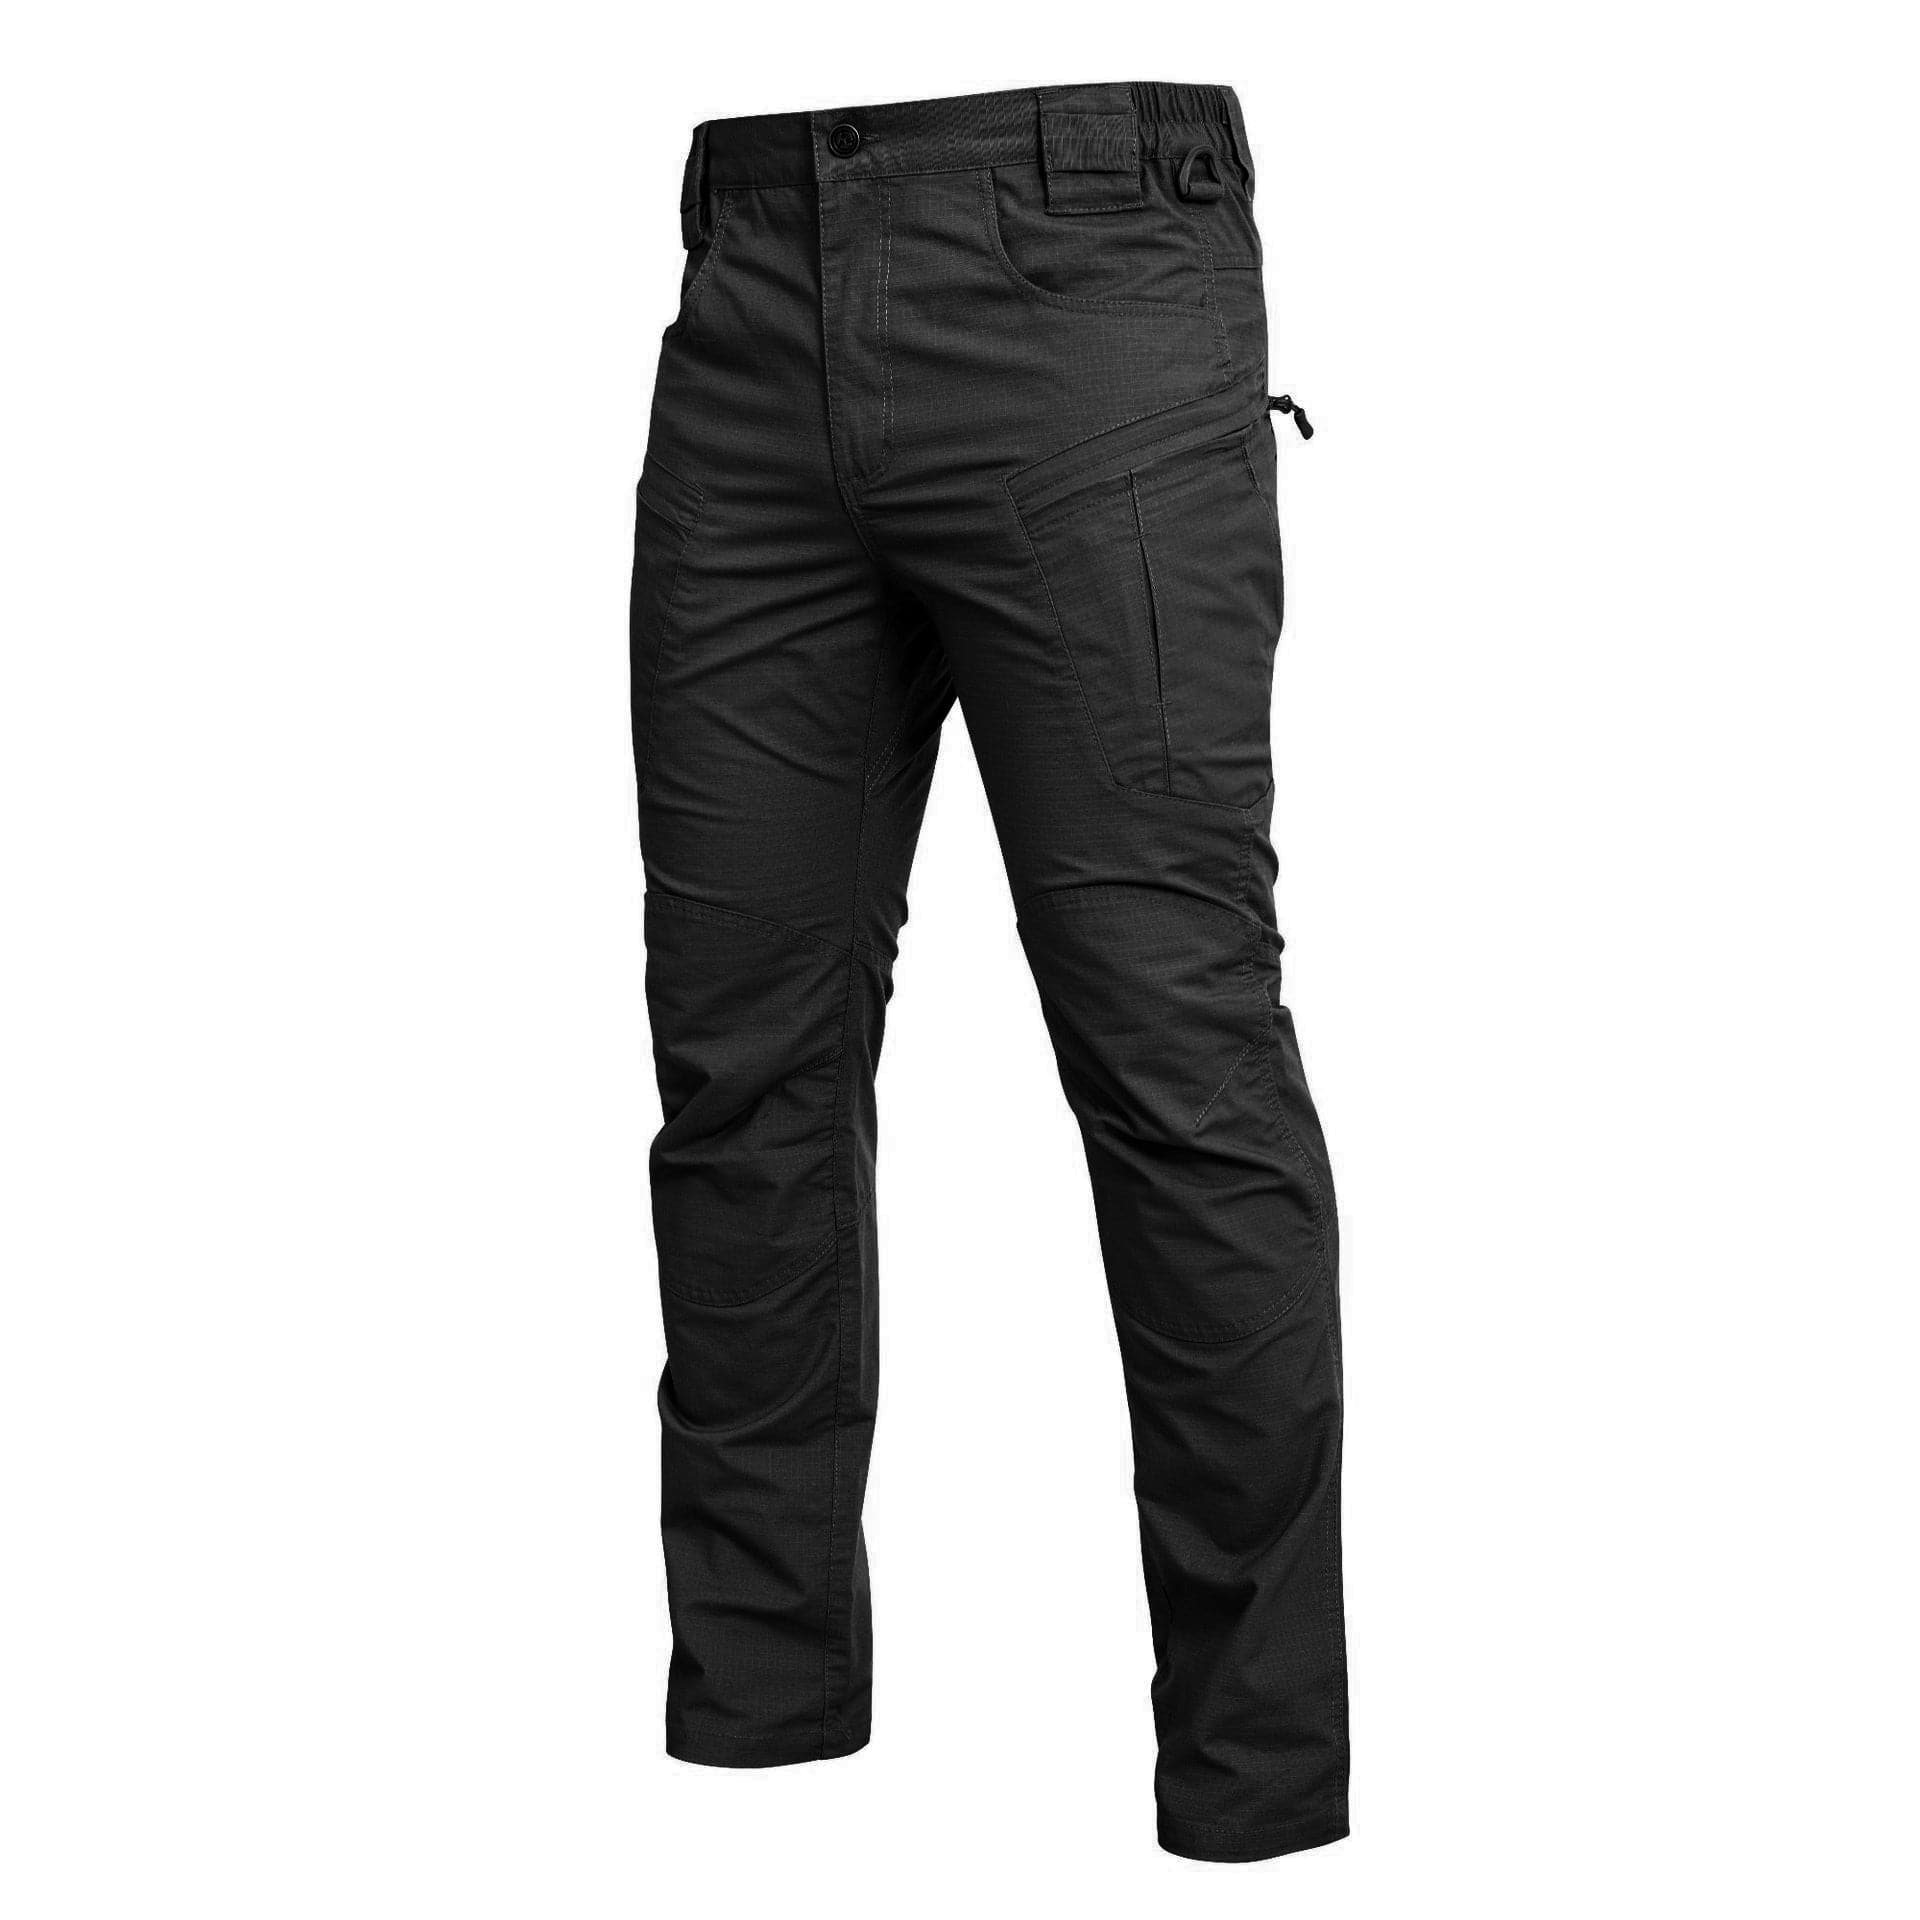 Tactical Resistant Outdoor Hunting Climing Nylon Cargo Pants - X5